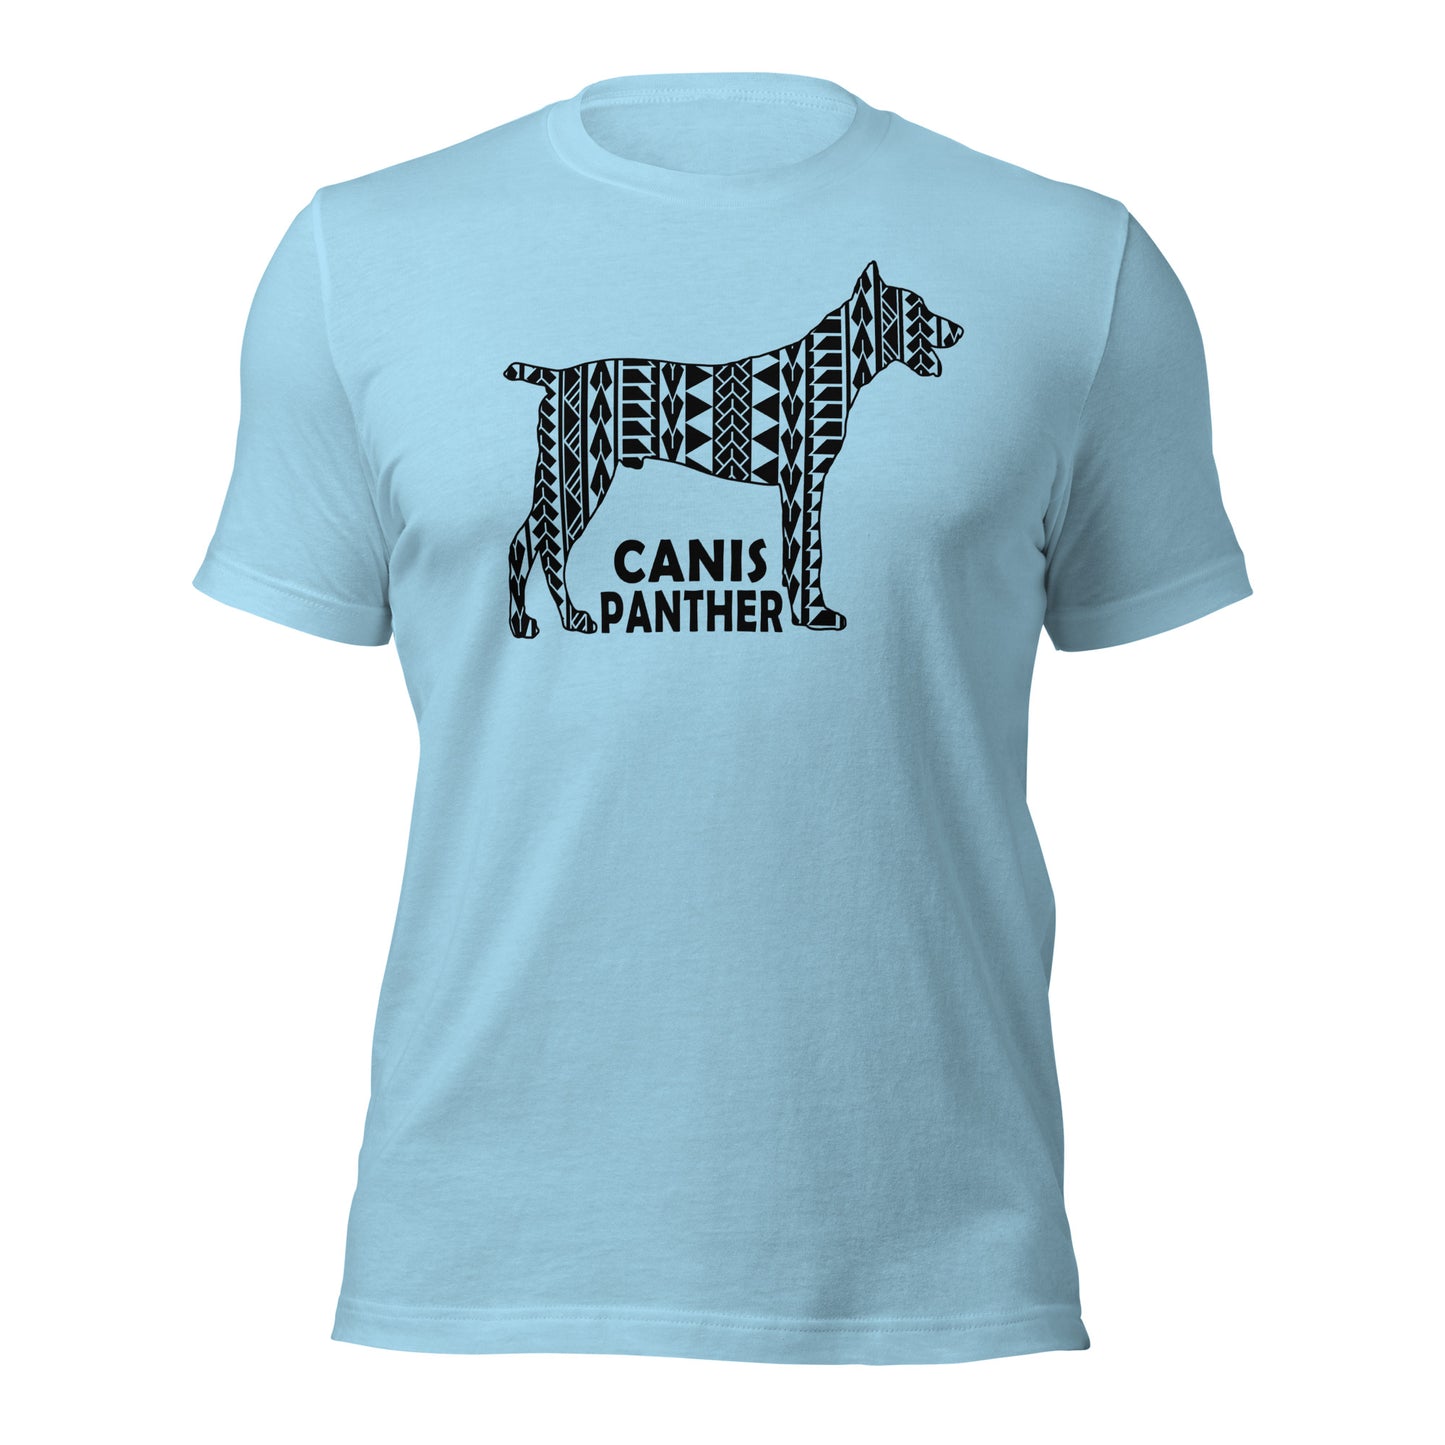 Canis Panther Polynesian t-shirt blue by Dog Artistry.